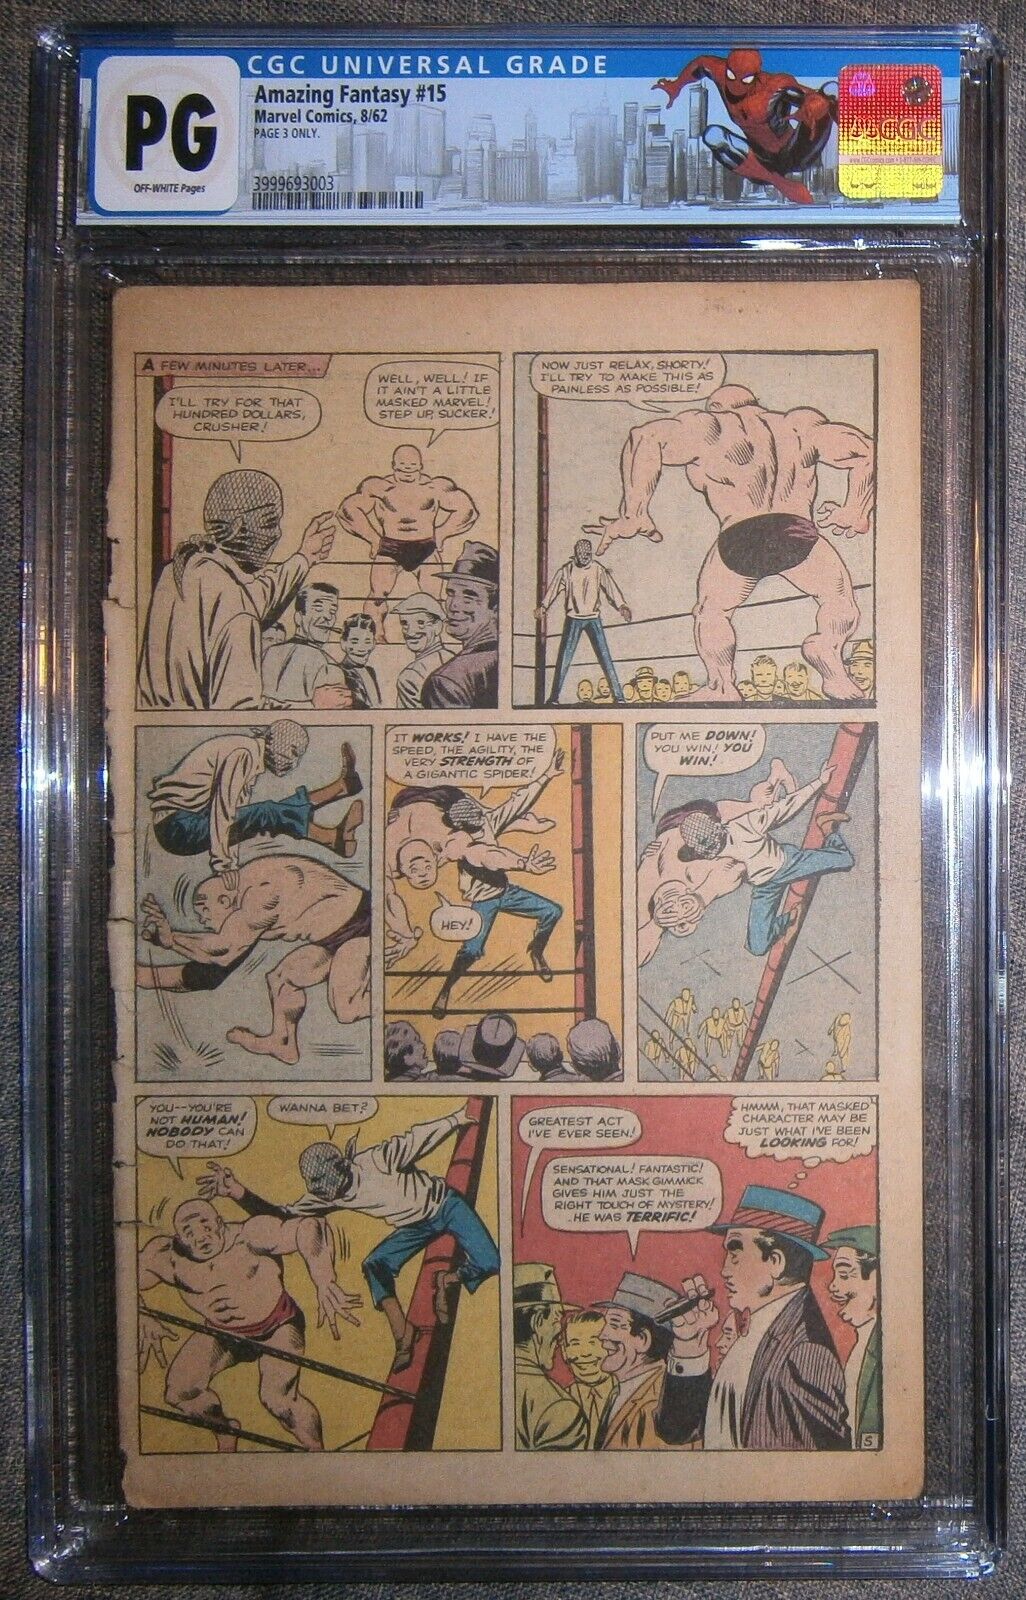 Amazing Fantasy 15 CGC PG Page 3 has 1st ever panels of the SpiderMan Costume